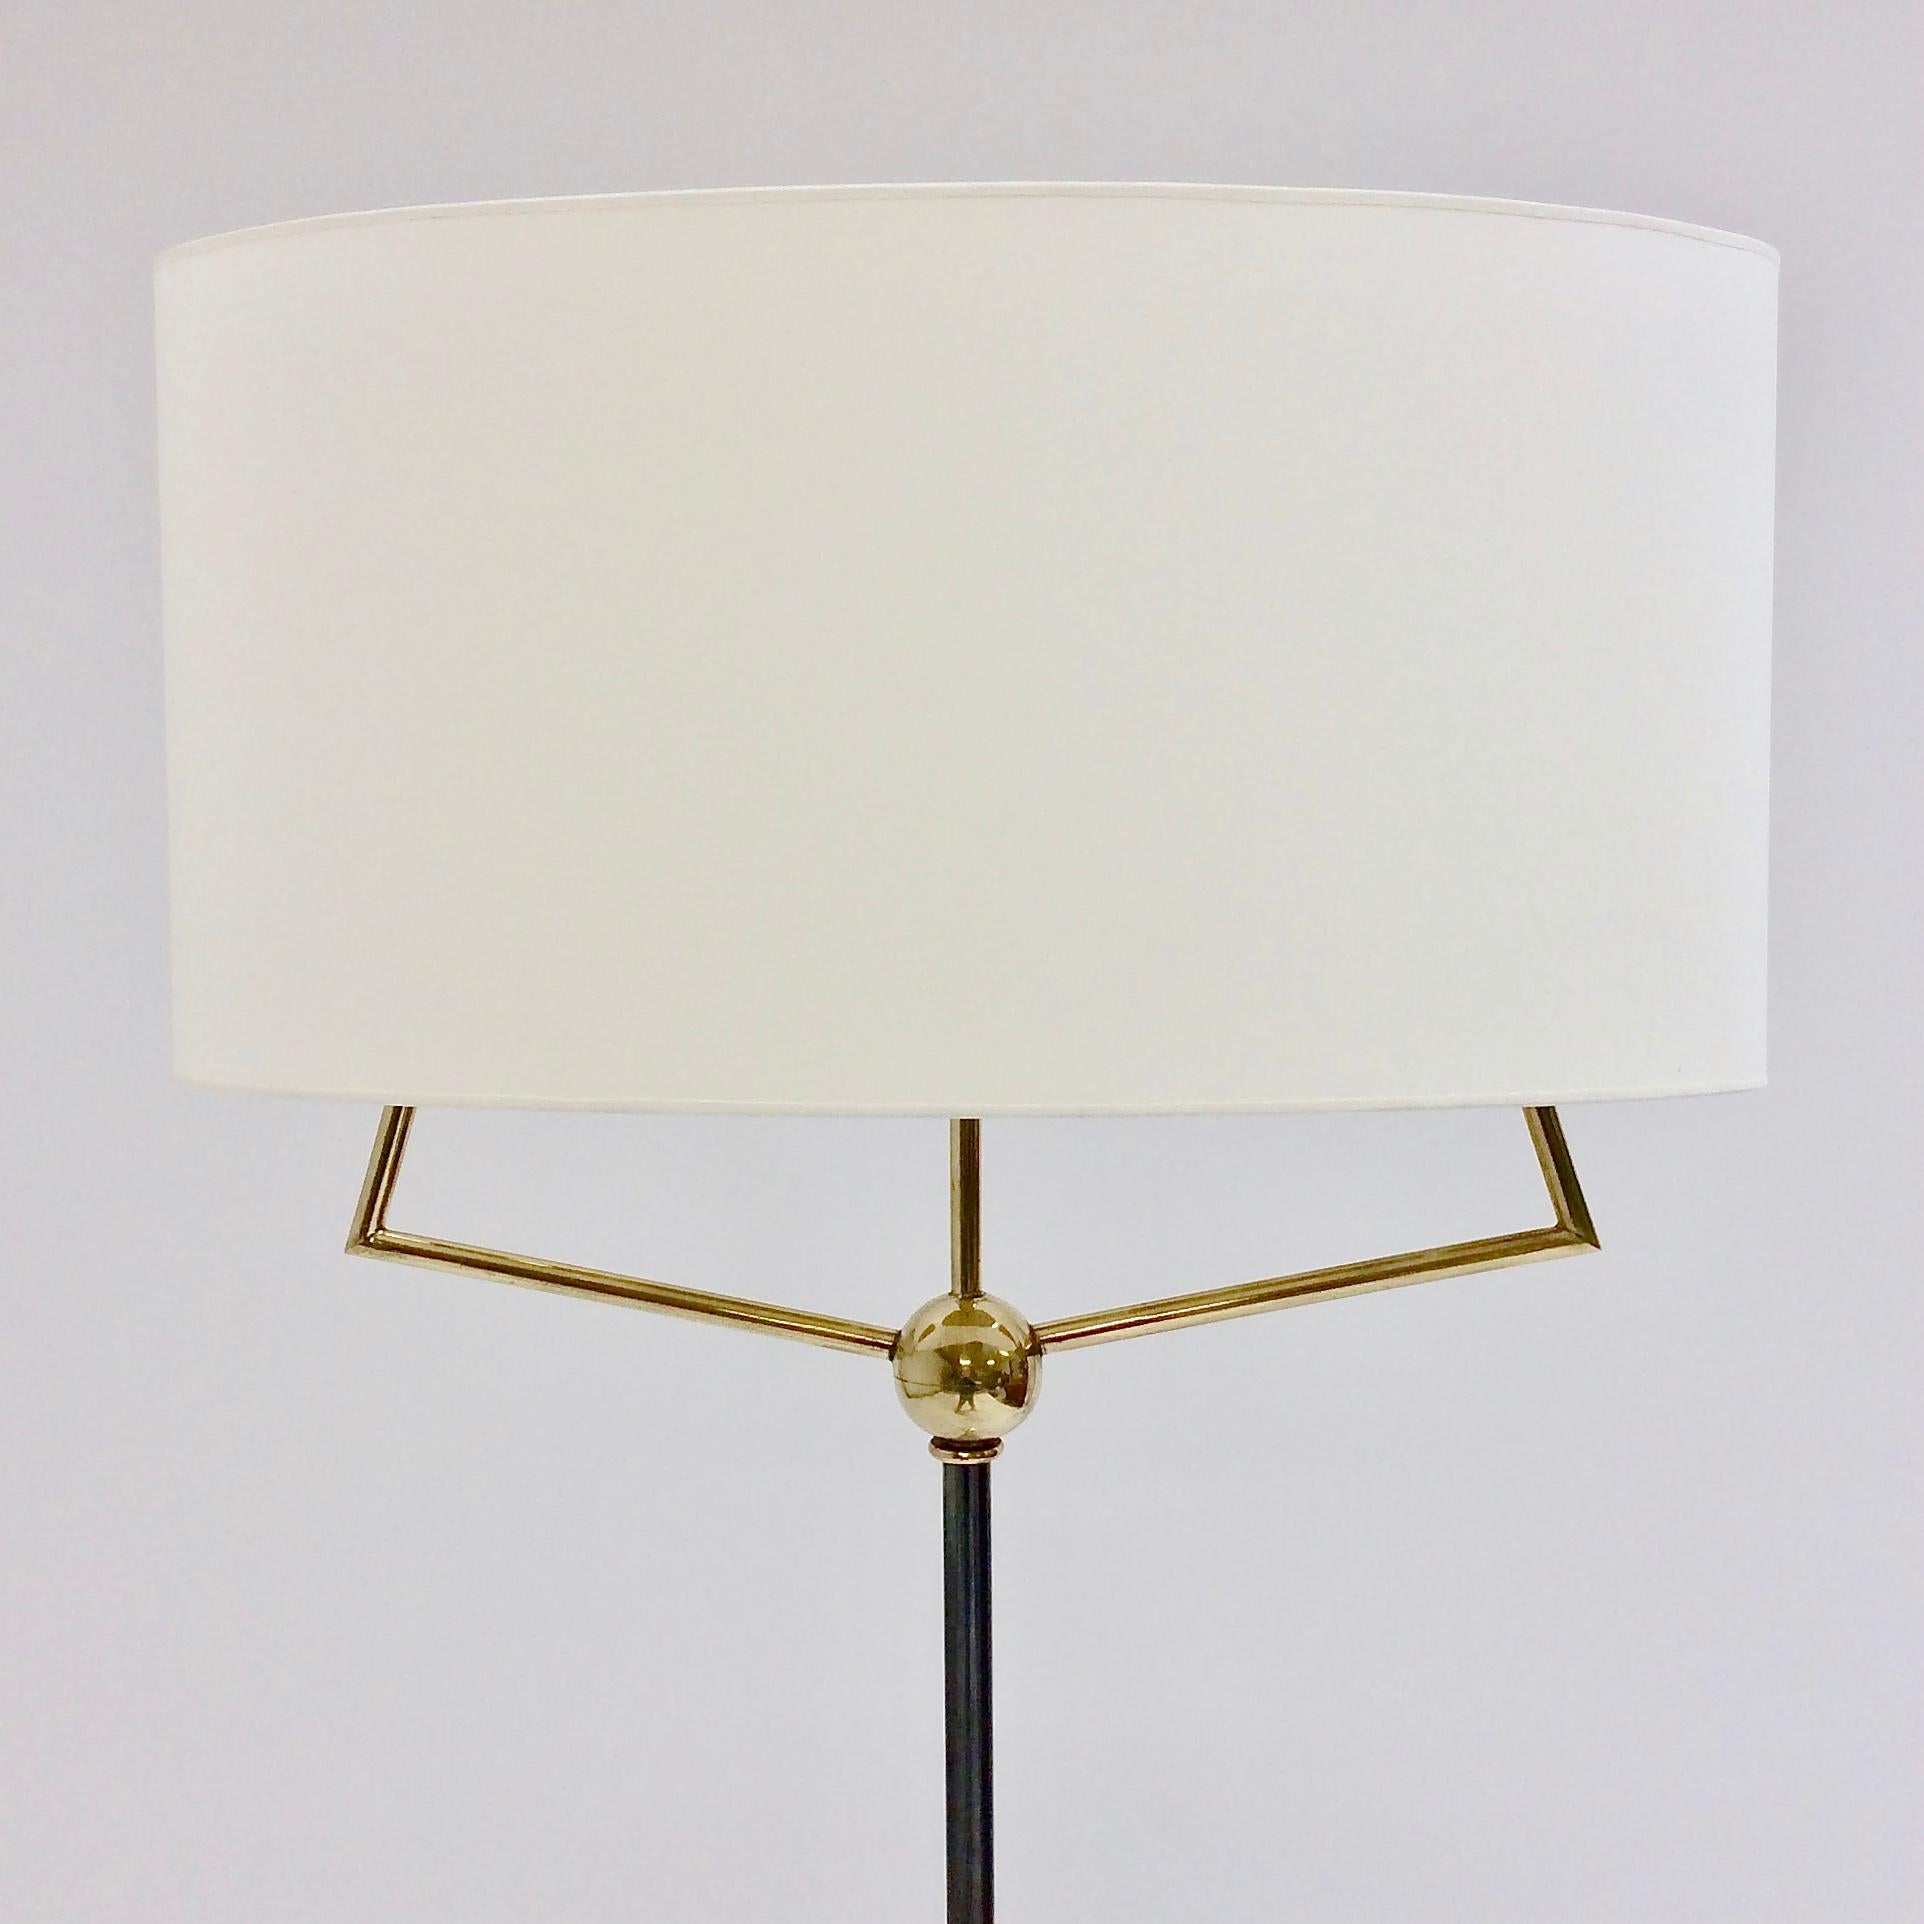 Elegant floor lamp, Leleu era, circa 1950, France.
Brass and patinated metal.
New ivory fabric redone as originally.
3 B22 bulbs of 40 W.
Dimensions: 163 cm H, 50 cm W, 26 cm D.
All purchases are covered by our Buyer Protection Guarantee.
This item